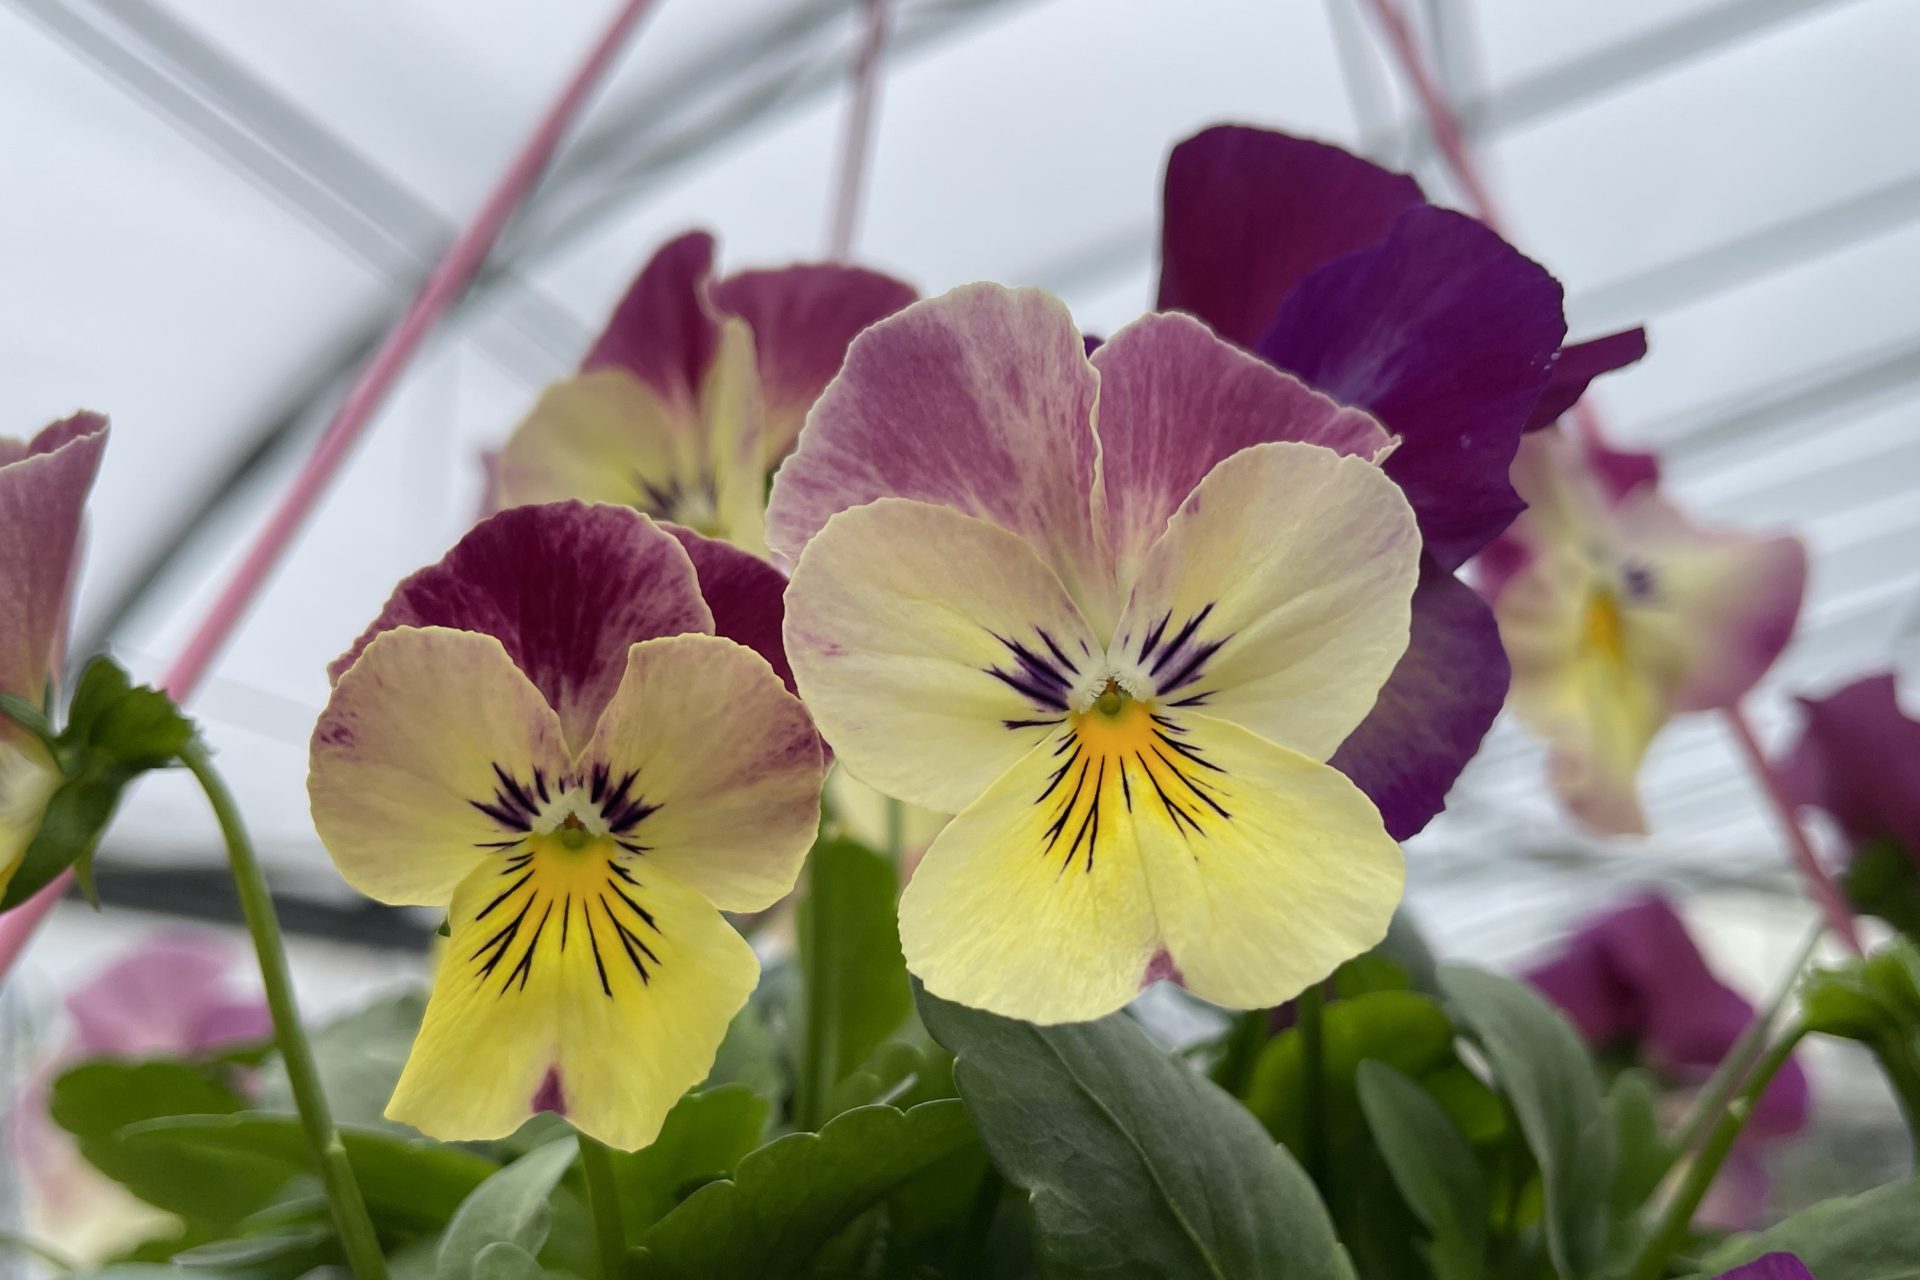 Gardening enthusiasts love pansies and violas for their vibrant colors and cheerful blooms. These popular flowers are perfect for adding a splash of color to any garden or container. If you want to have even more of these beautiful flowers in your garden, there are three easy ways to propagate them.